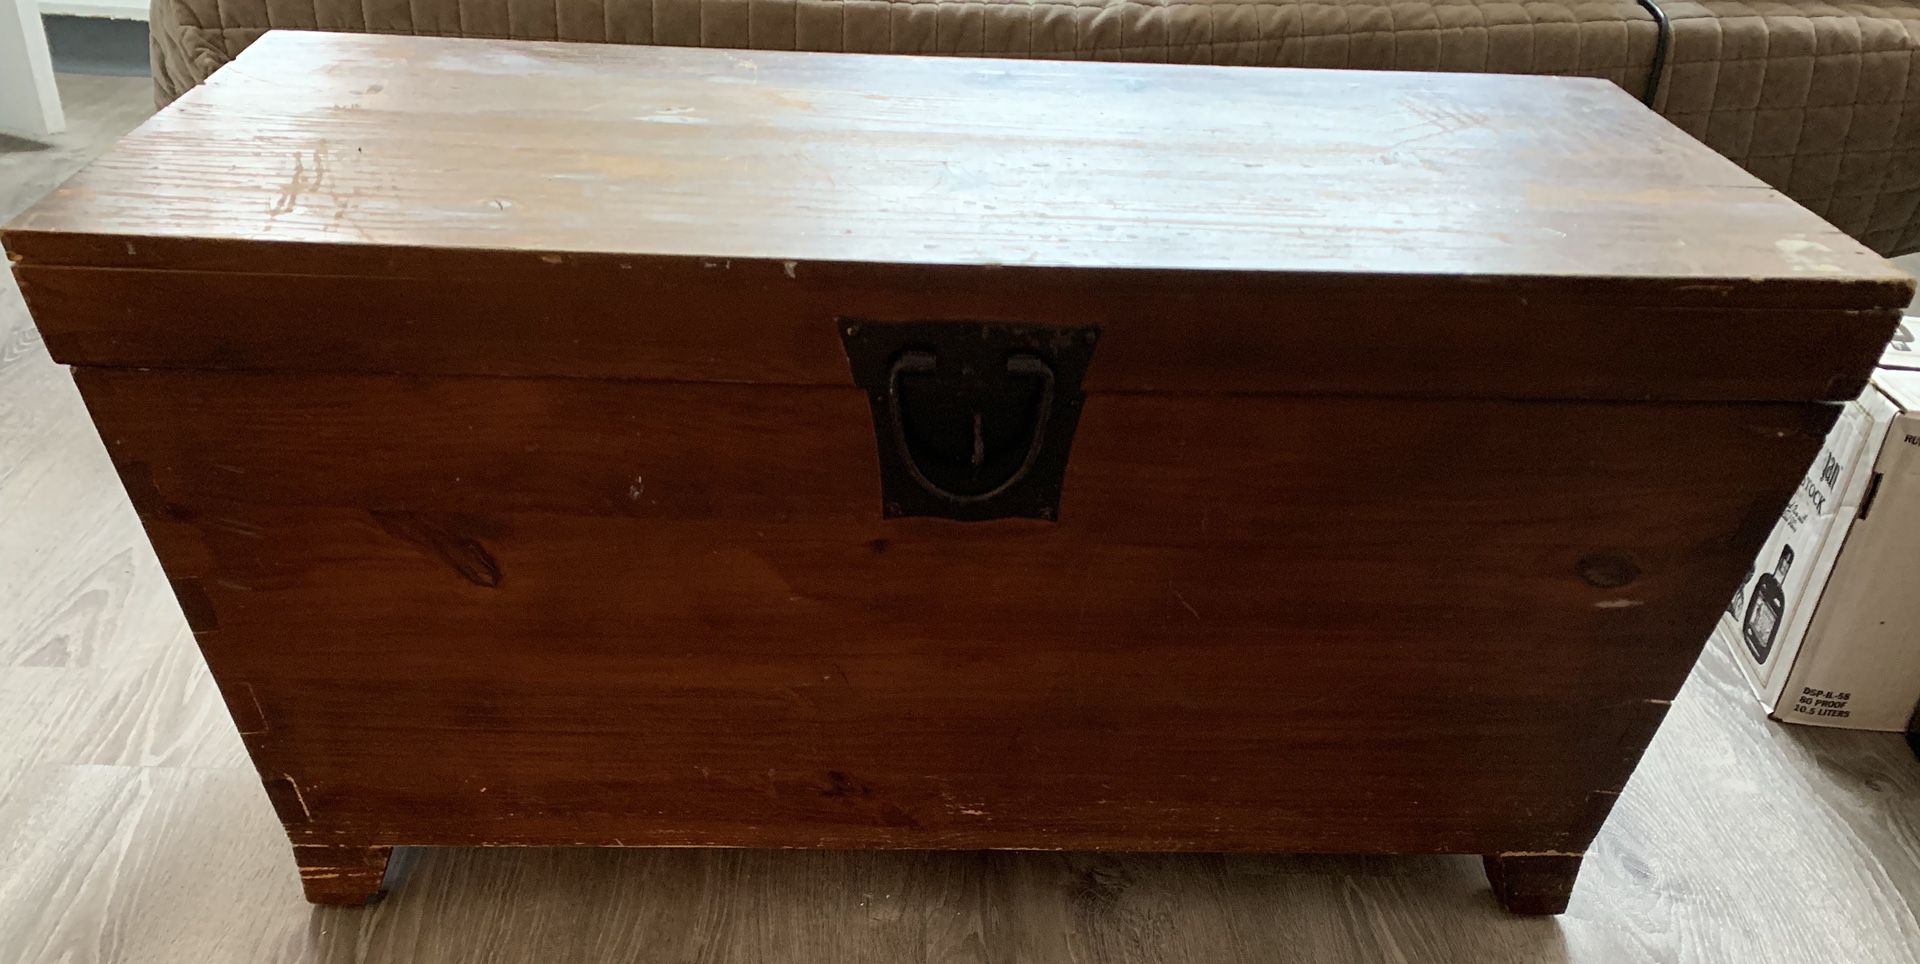 DIY Project: Solid Wood Trunk for Storage or Use as Coffee Table